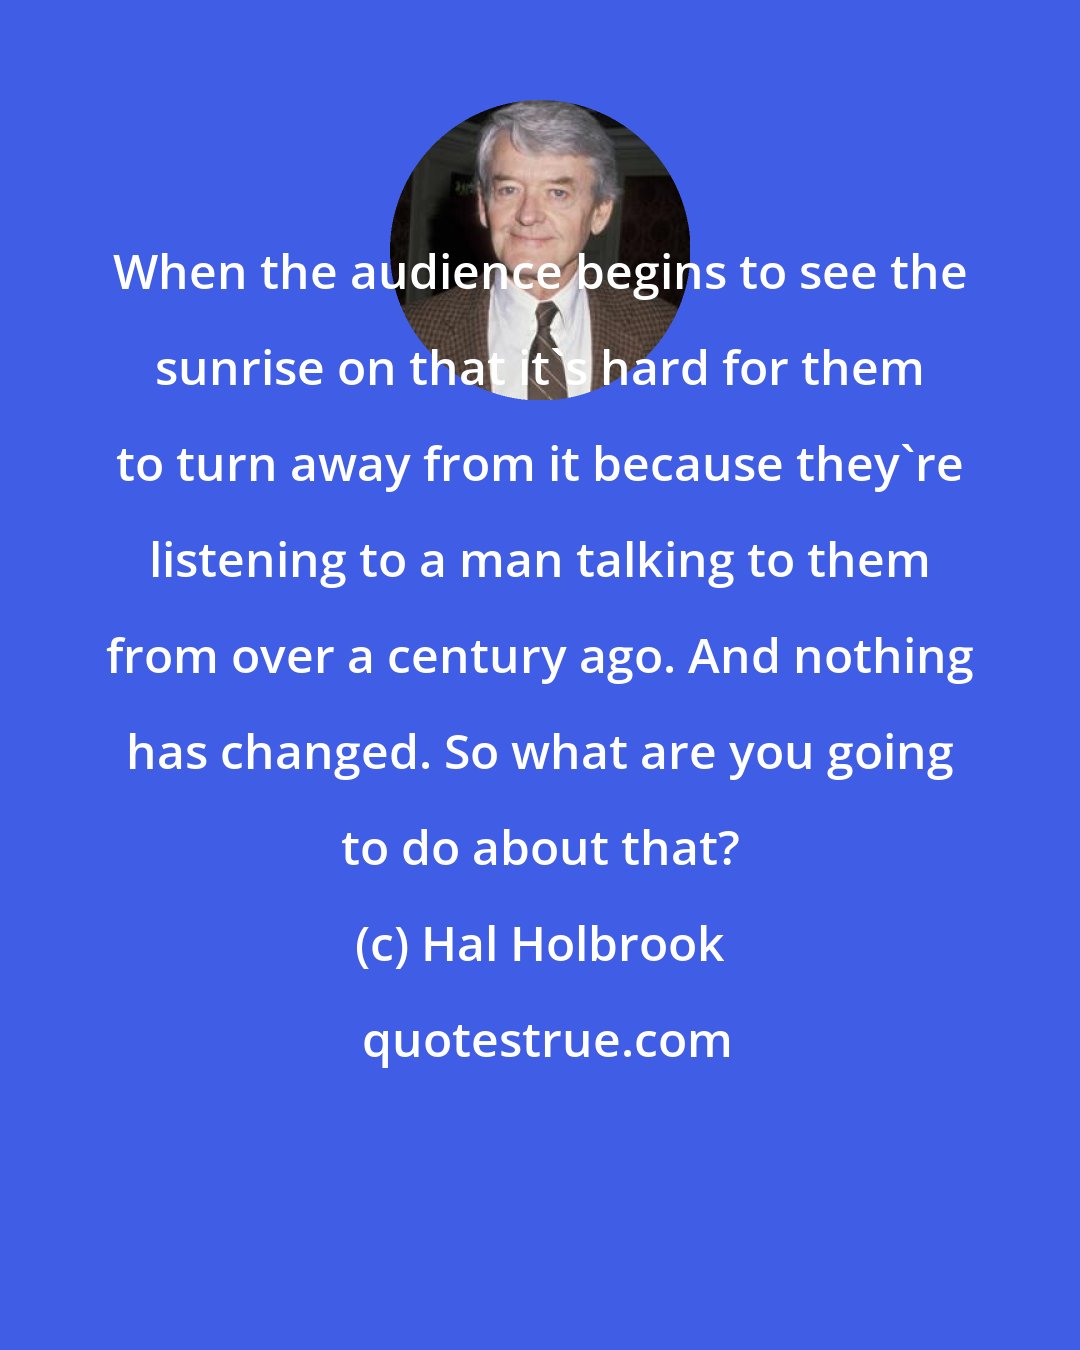 Hal Holbrook: When the audience begins to see the sunrise on that it's hard for them to turn away from it because they're listening to a man talking to them from over a century ago. And nothing has changed. So what are you going to do about that?